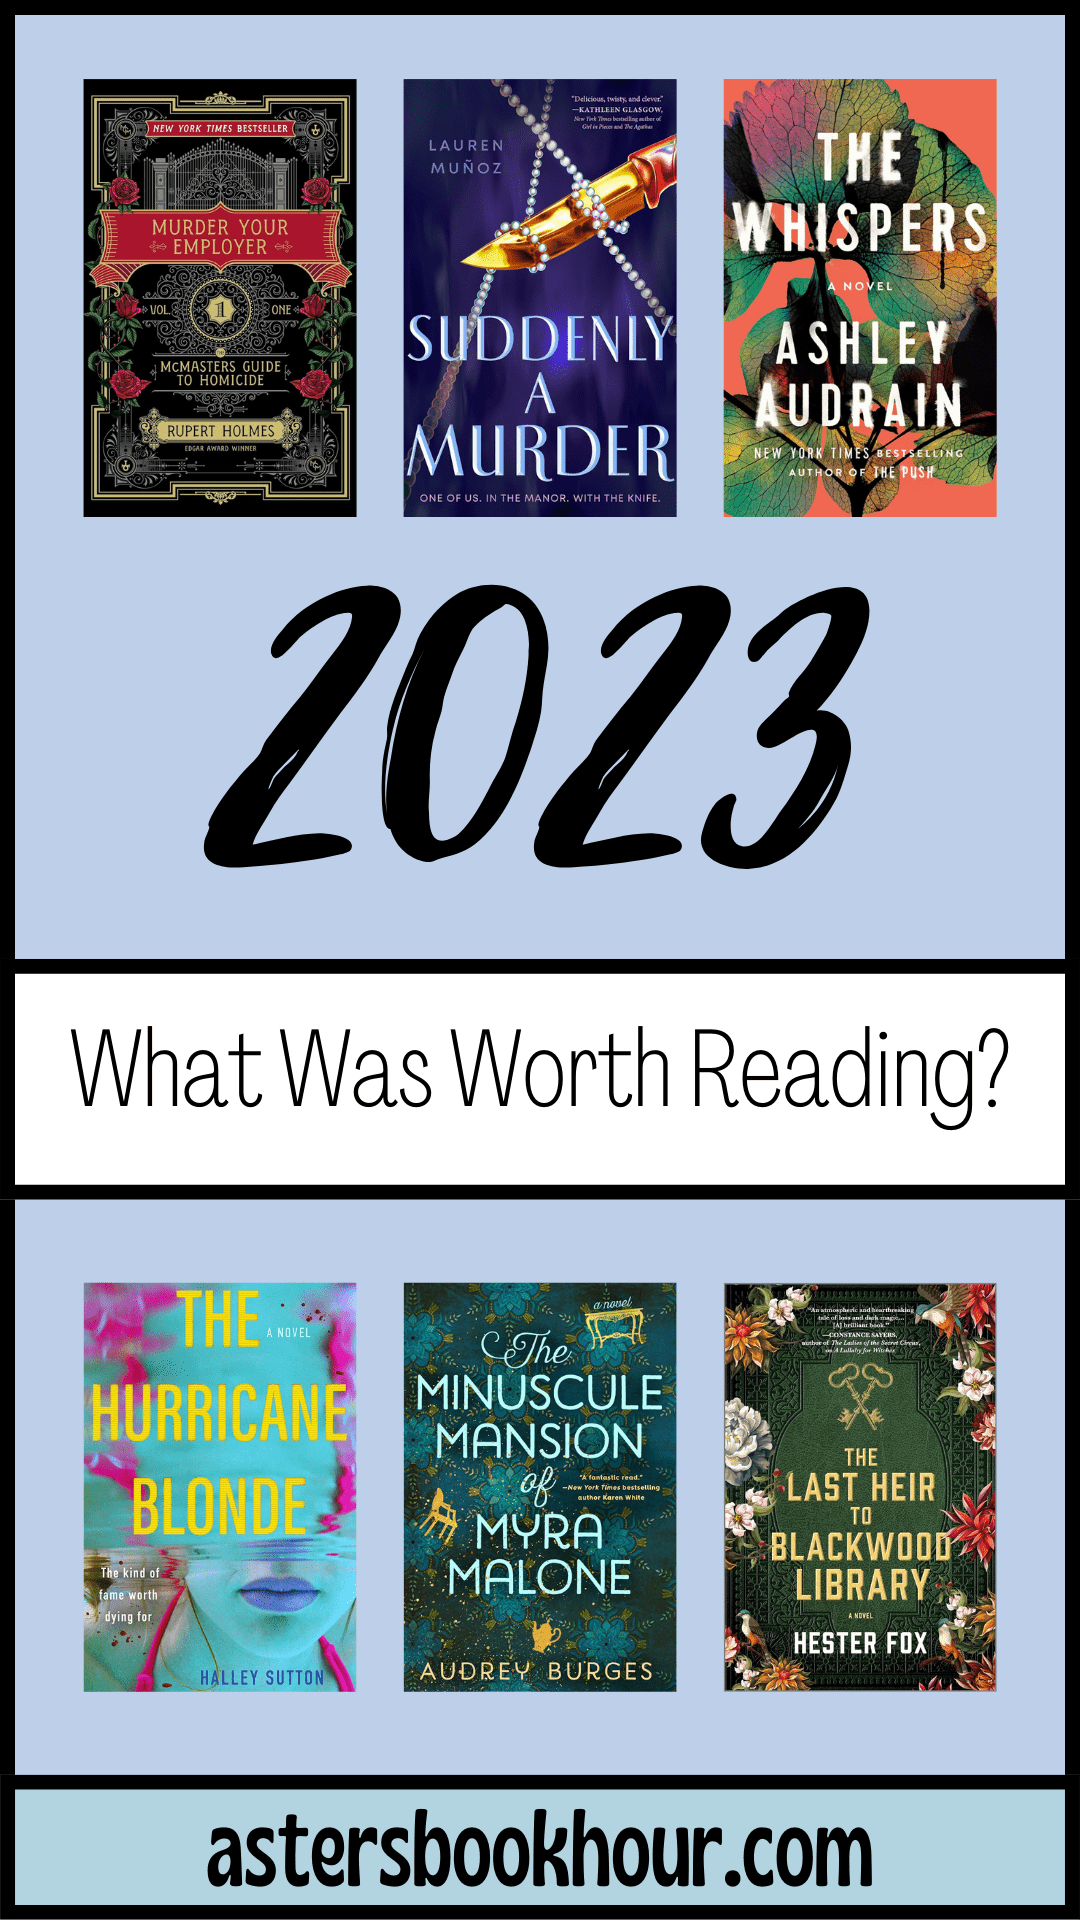 Image used to link blog post - New 2024 Novels You Must Read | January - June - to pinterest. Image is for aesthetic purposes and created by Aster's Book Hour excluding the book covers.